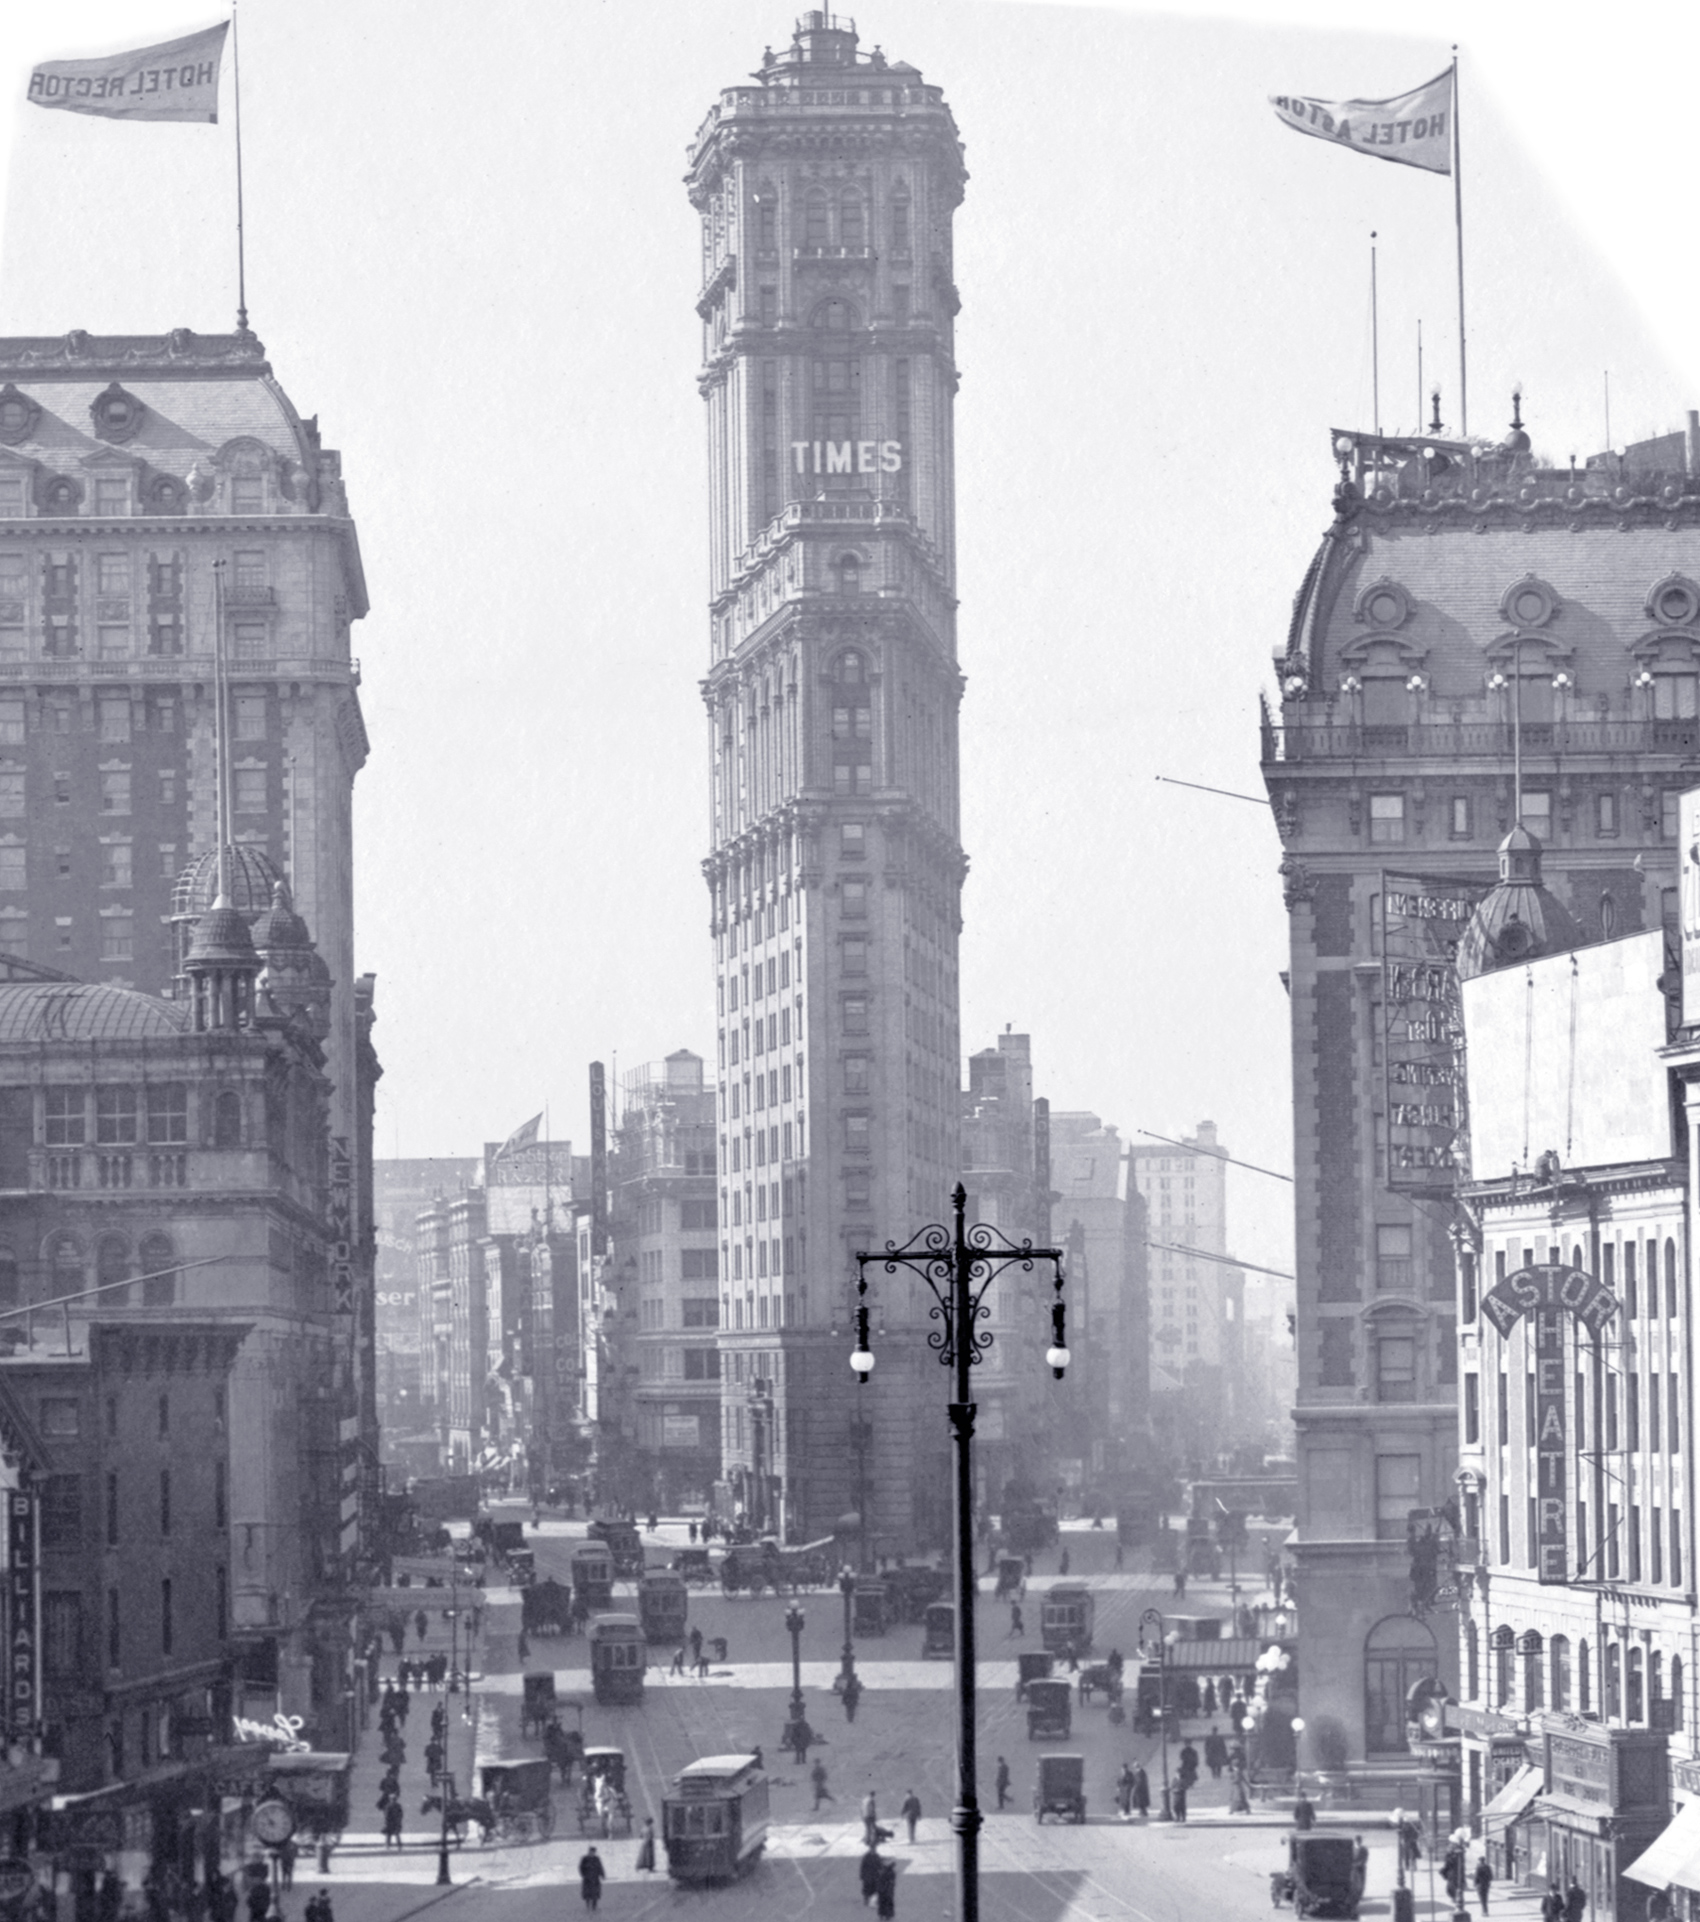 Times Square, junction of Broadway and Seventh Avenue, Manhattan